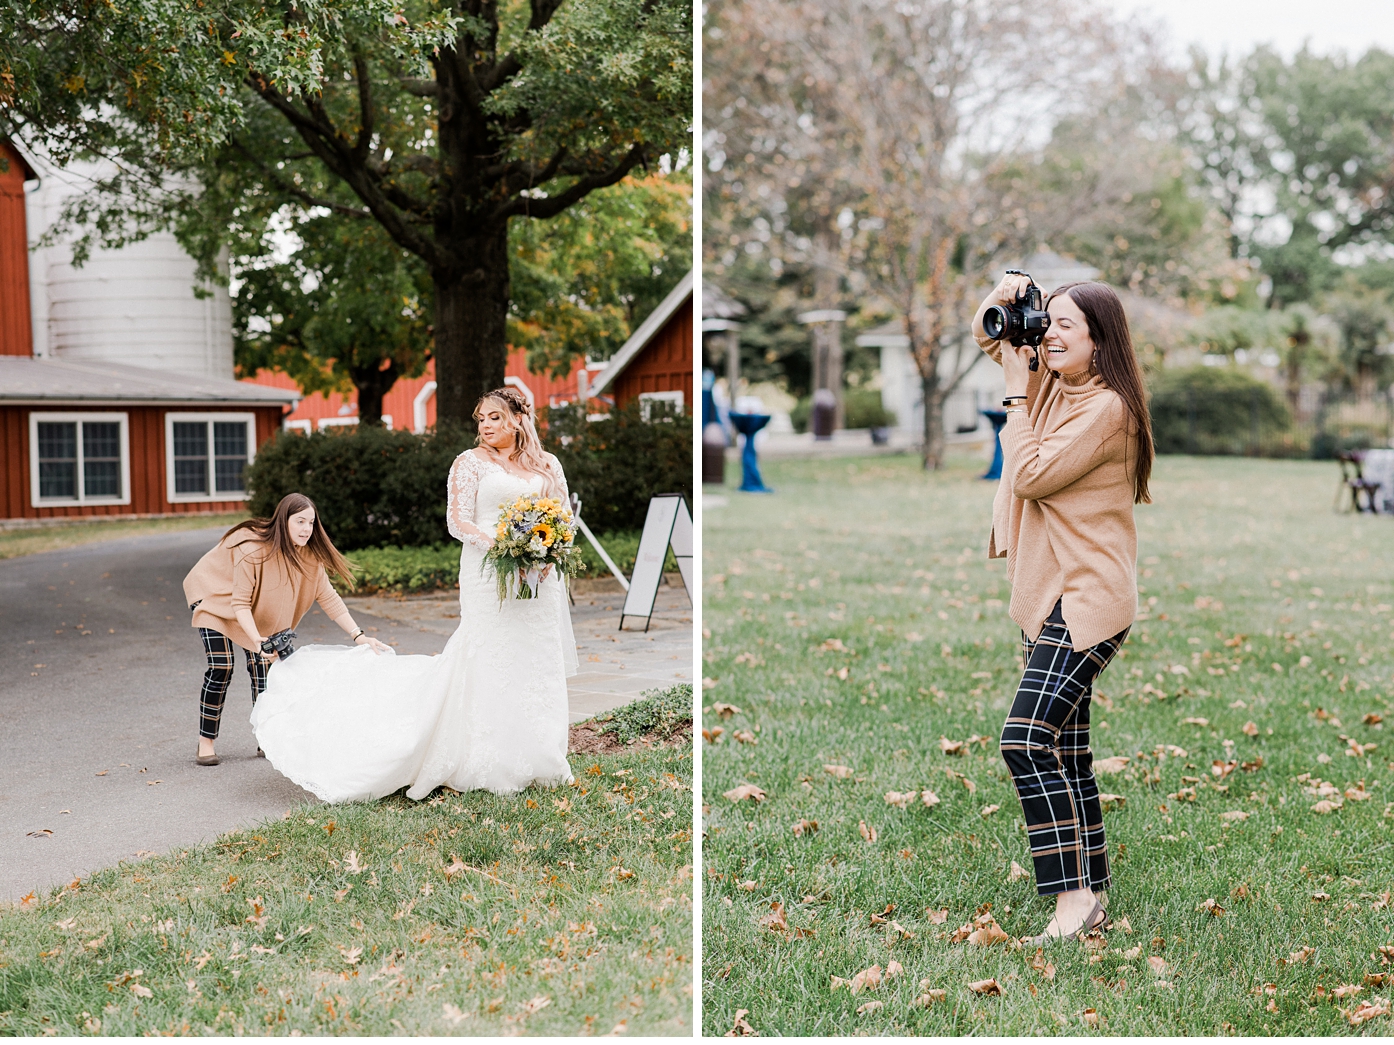 2019 Behind the Scenes from Alisandra Photography